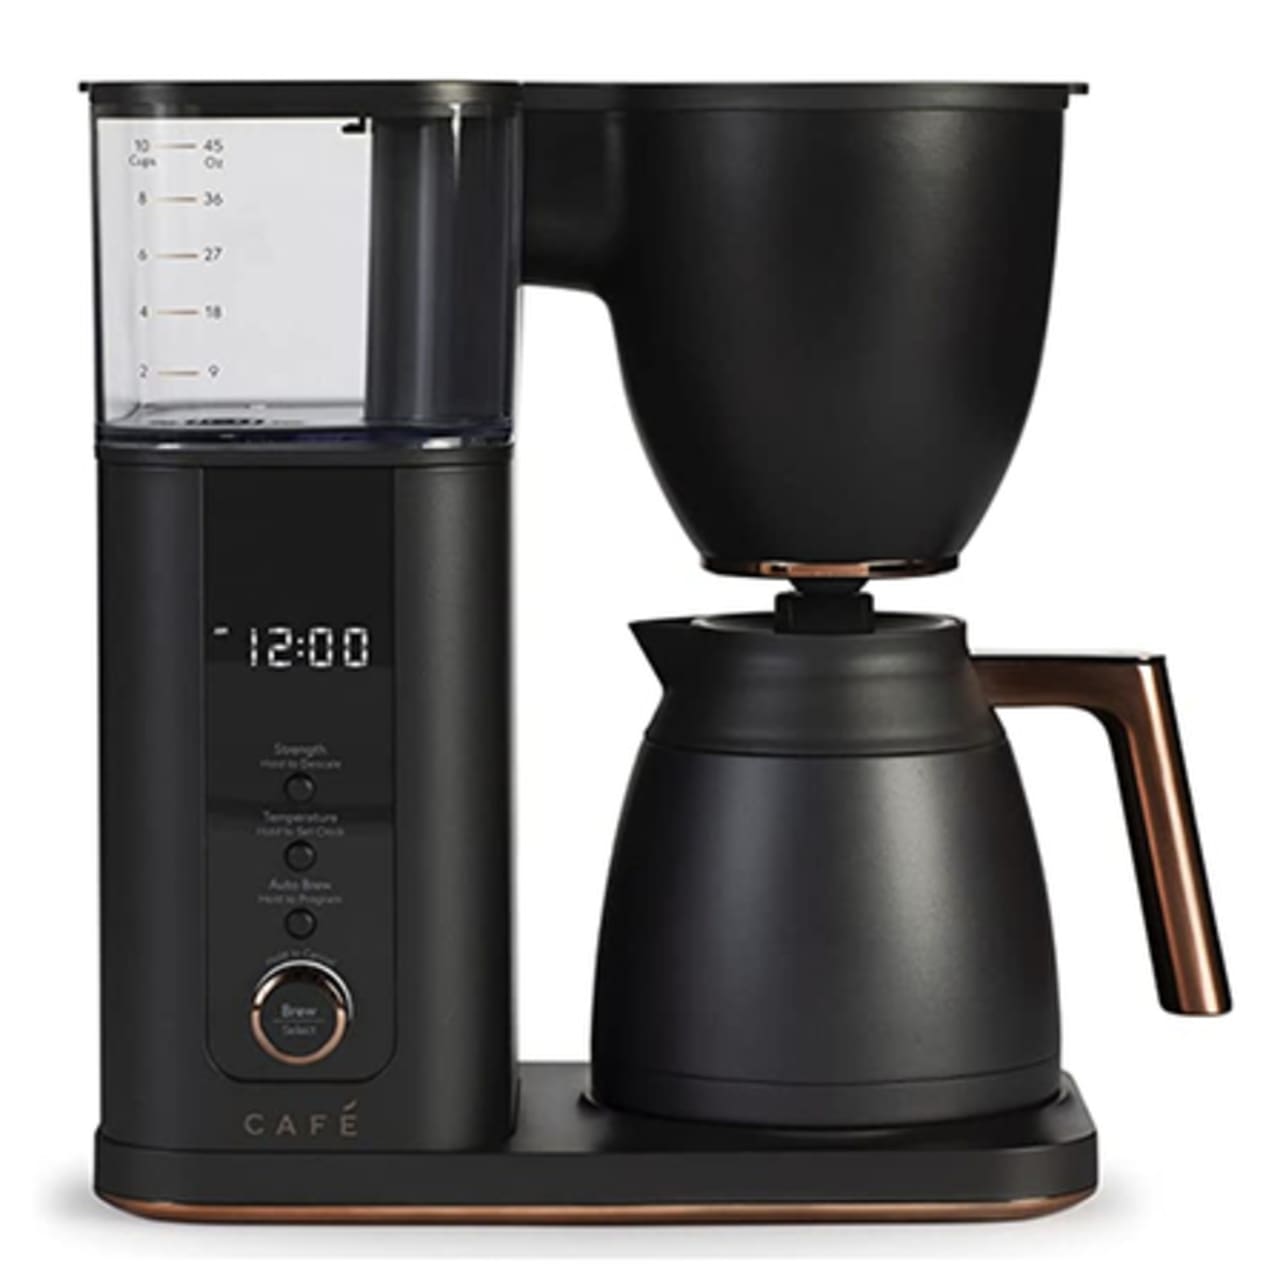 Specialty Drip Coffee Maker